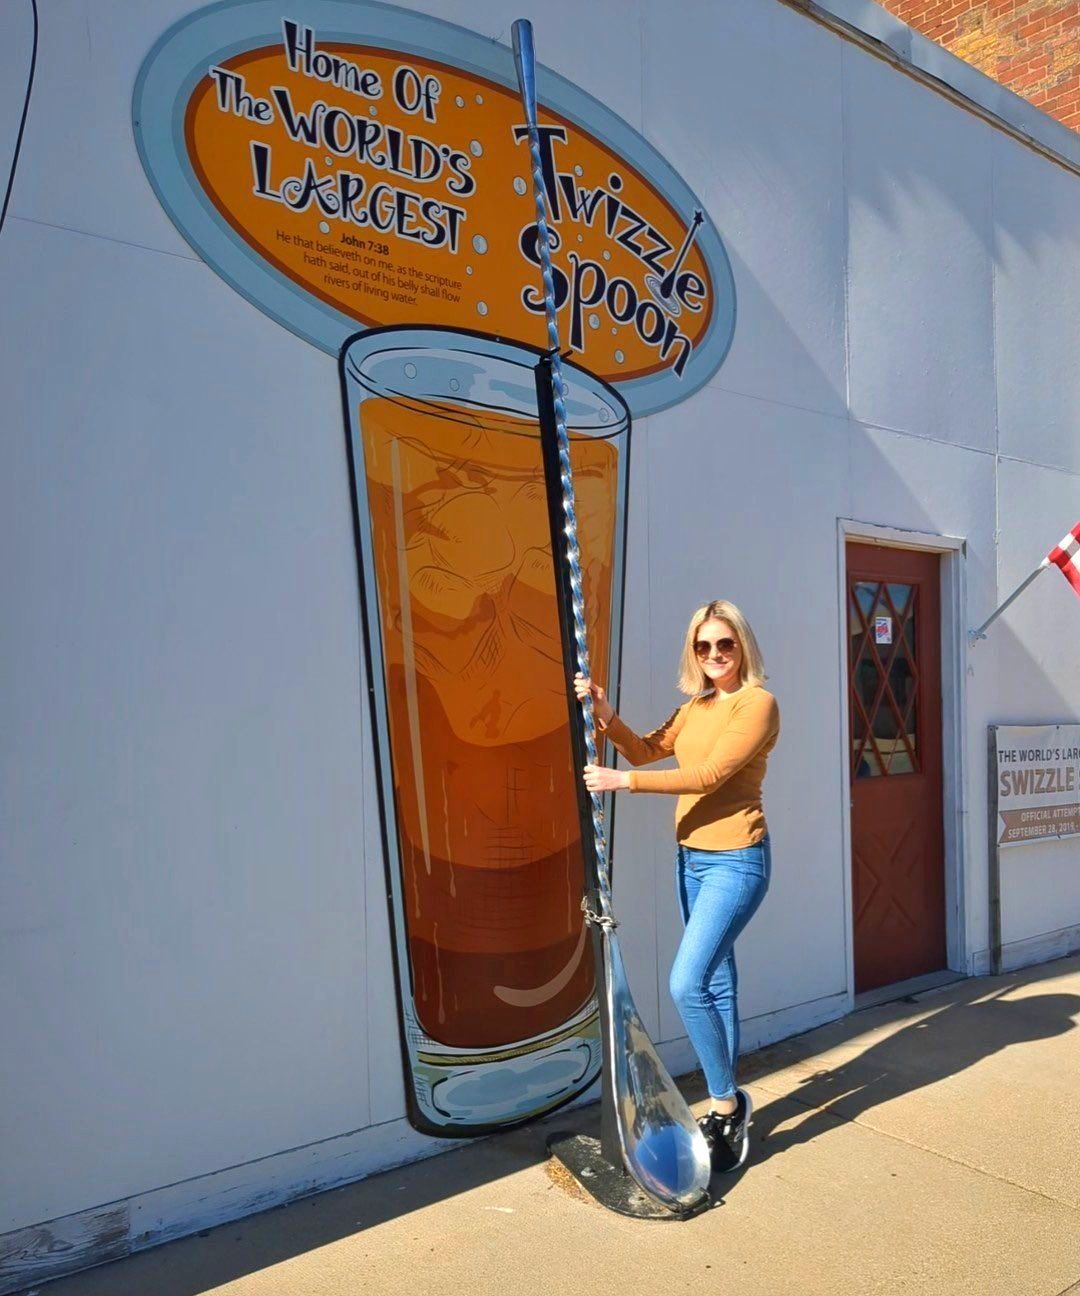 
World’s Largest Swizzle Spoon, world record in Casey, Illinois